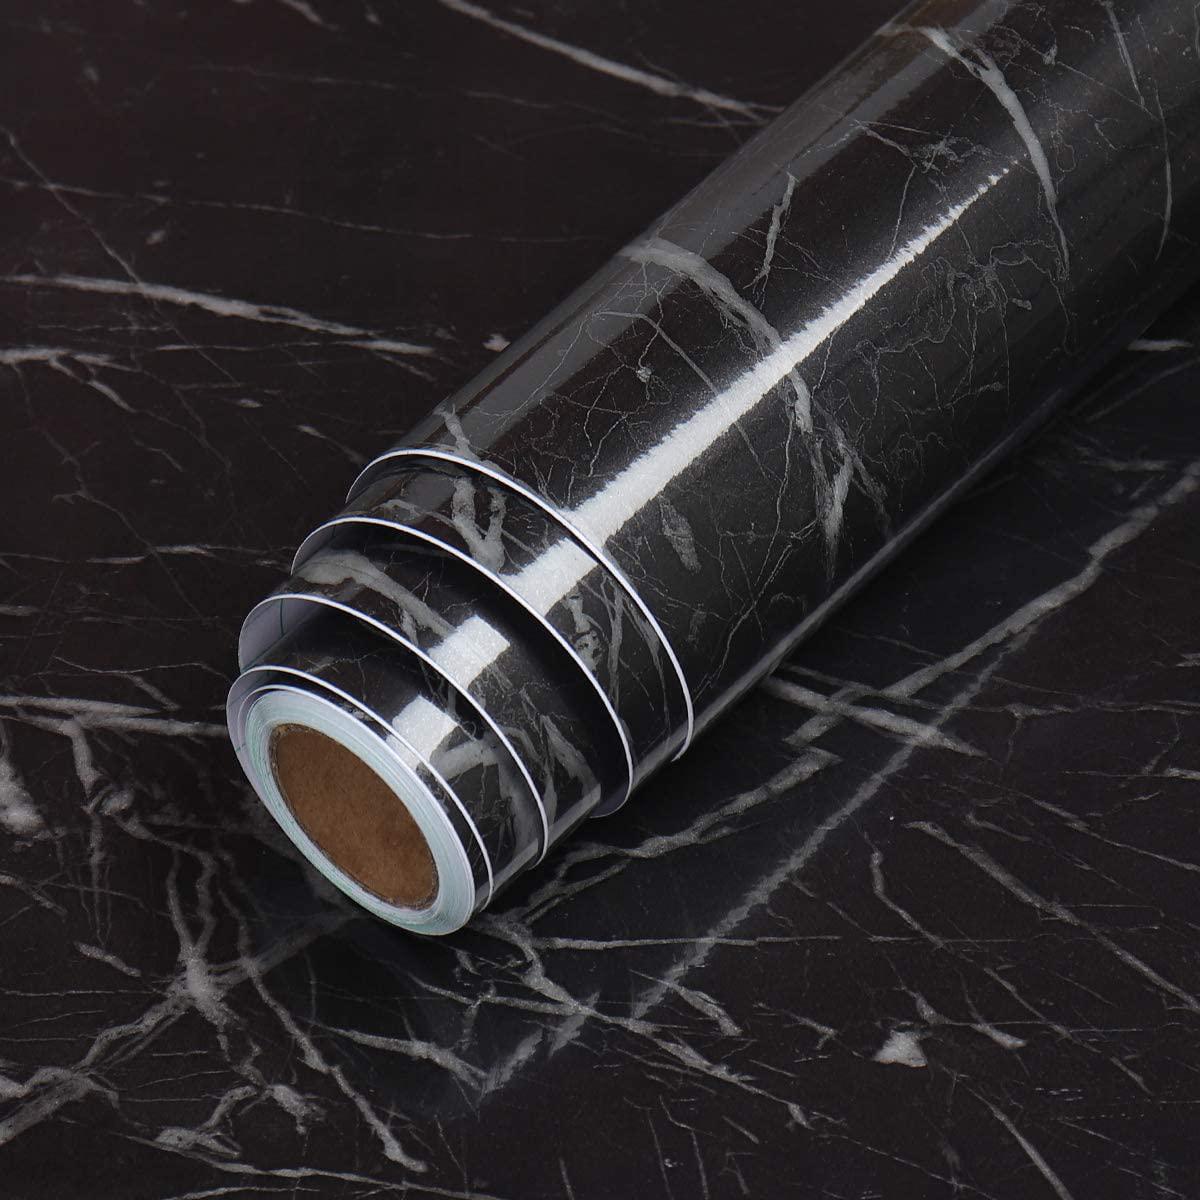 LACHEERY, LaCheery 24x160in Black Marble Contact Paper Granite Countertops Sticker Peel and Stick Wallpaper for Cabinets Backsplash Table Desk Furniture Decorative Adhesive Film Waterproof PVC Wall Sticker